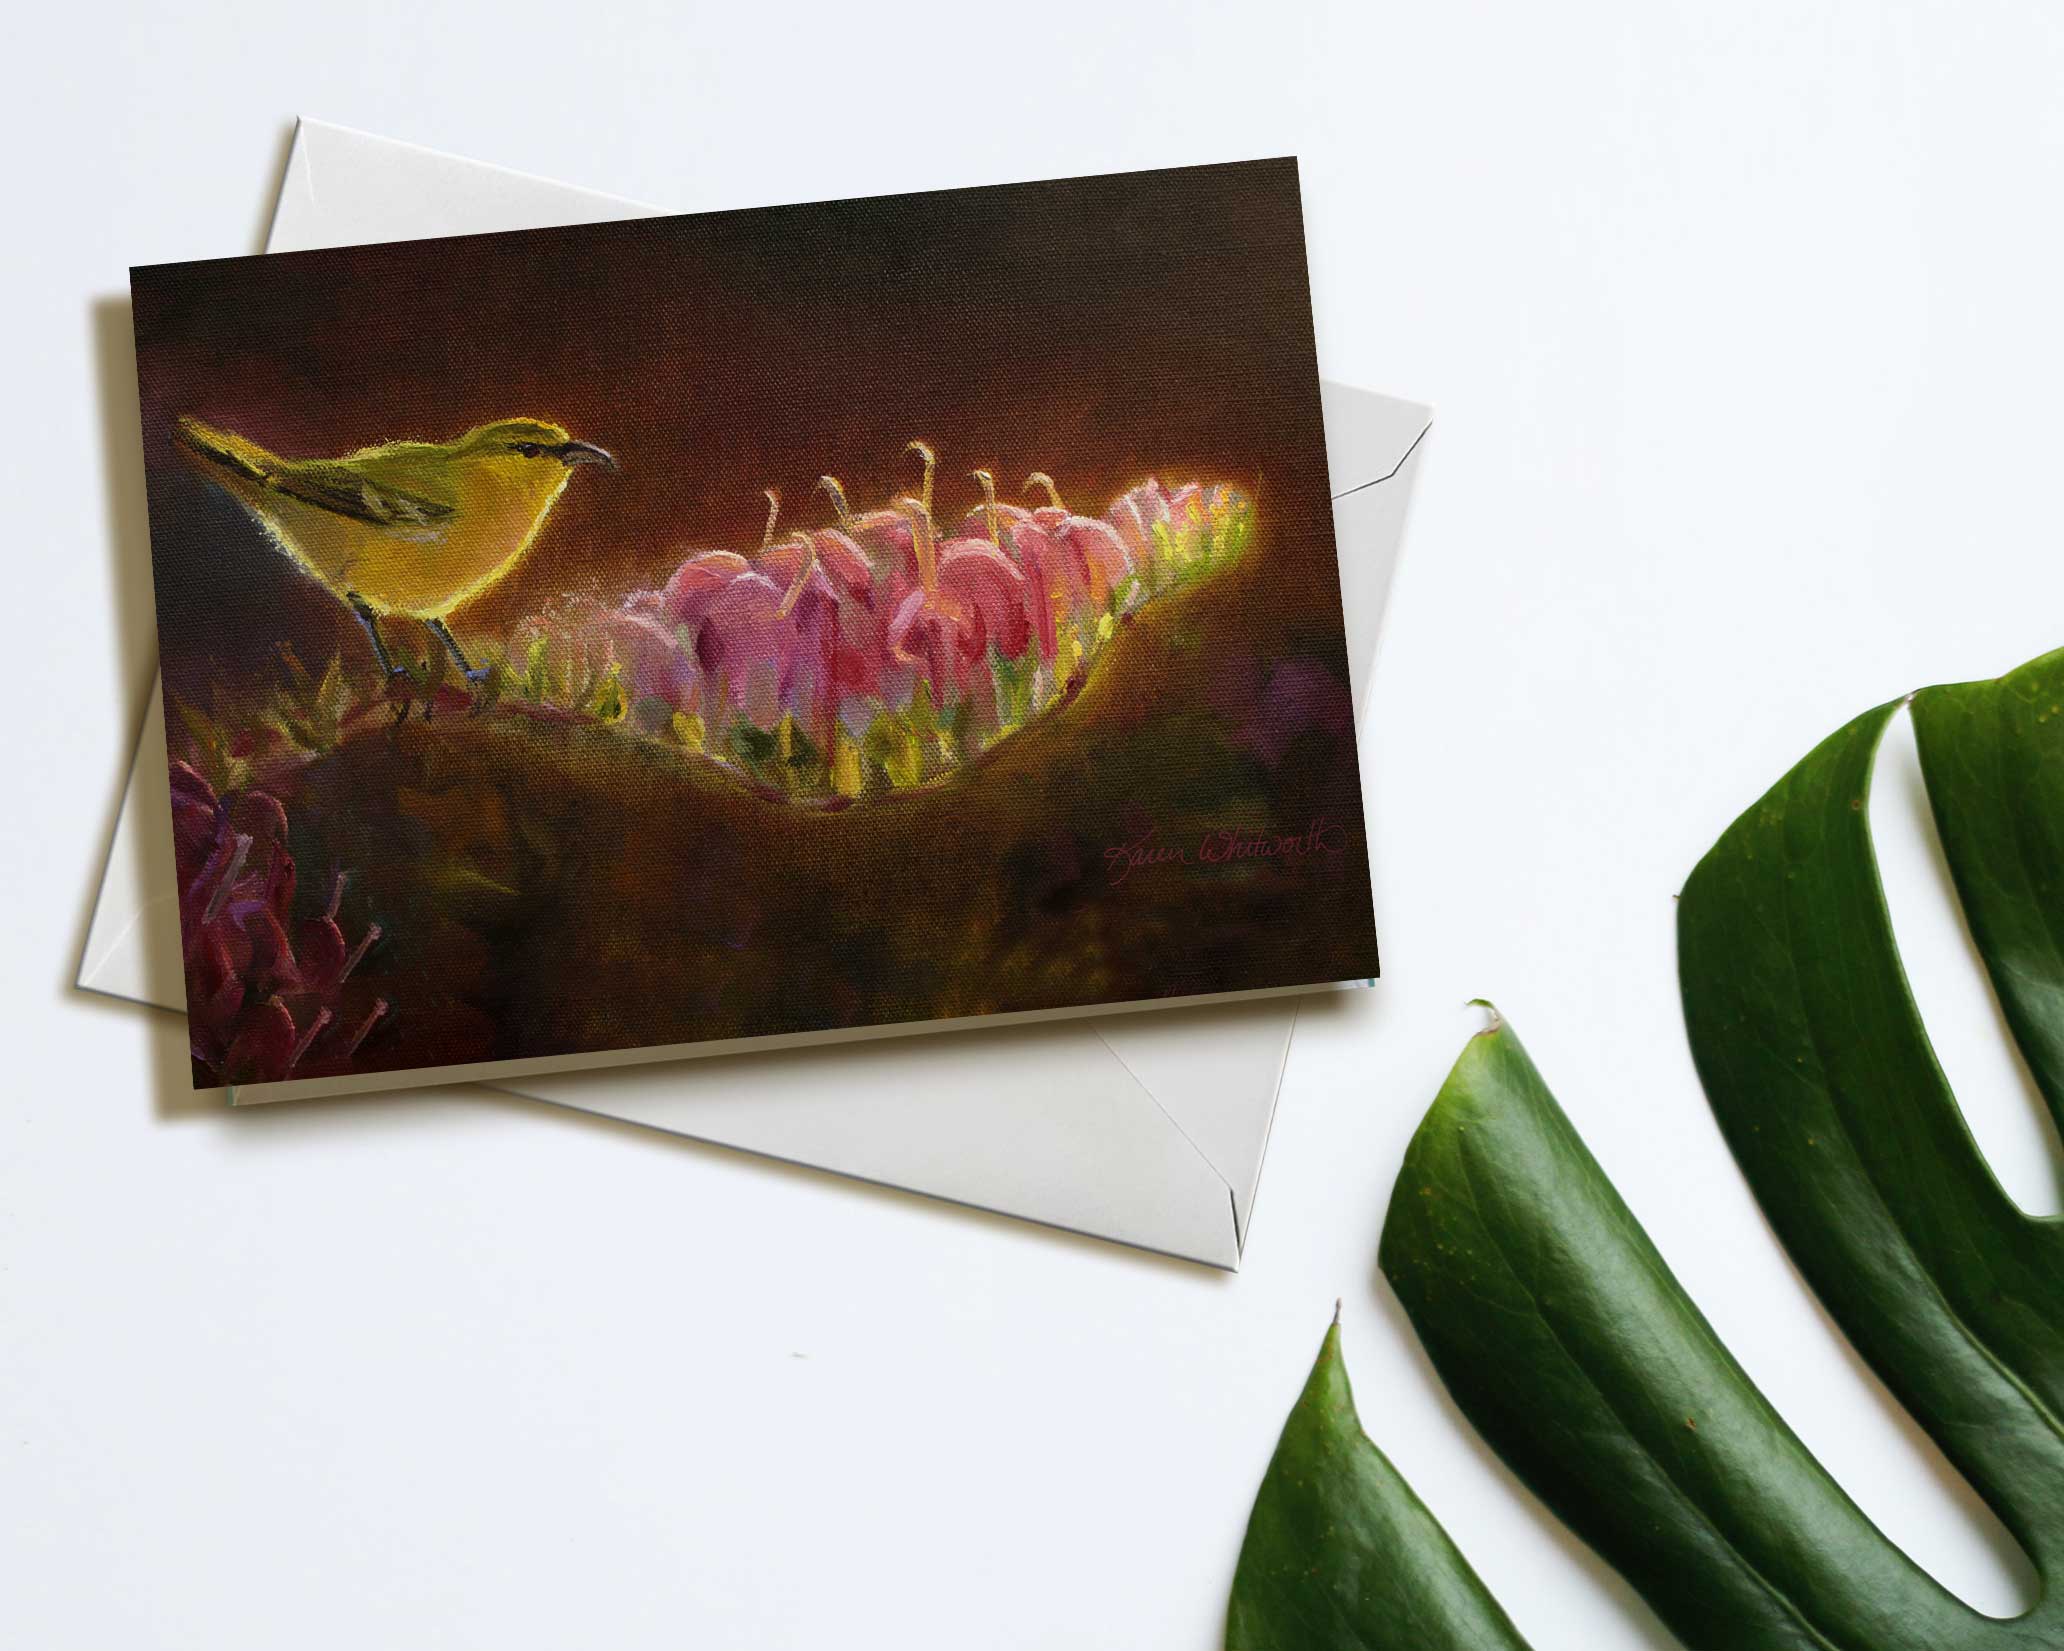 Hawaii note card featuring painting of Amakihi Bird and Koli'i Flower against a white background